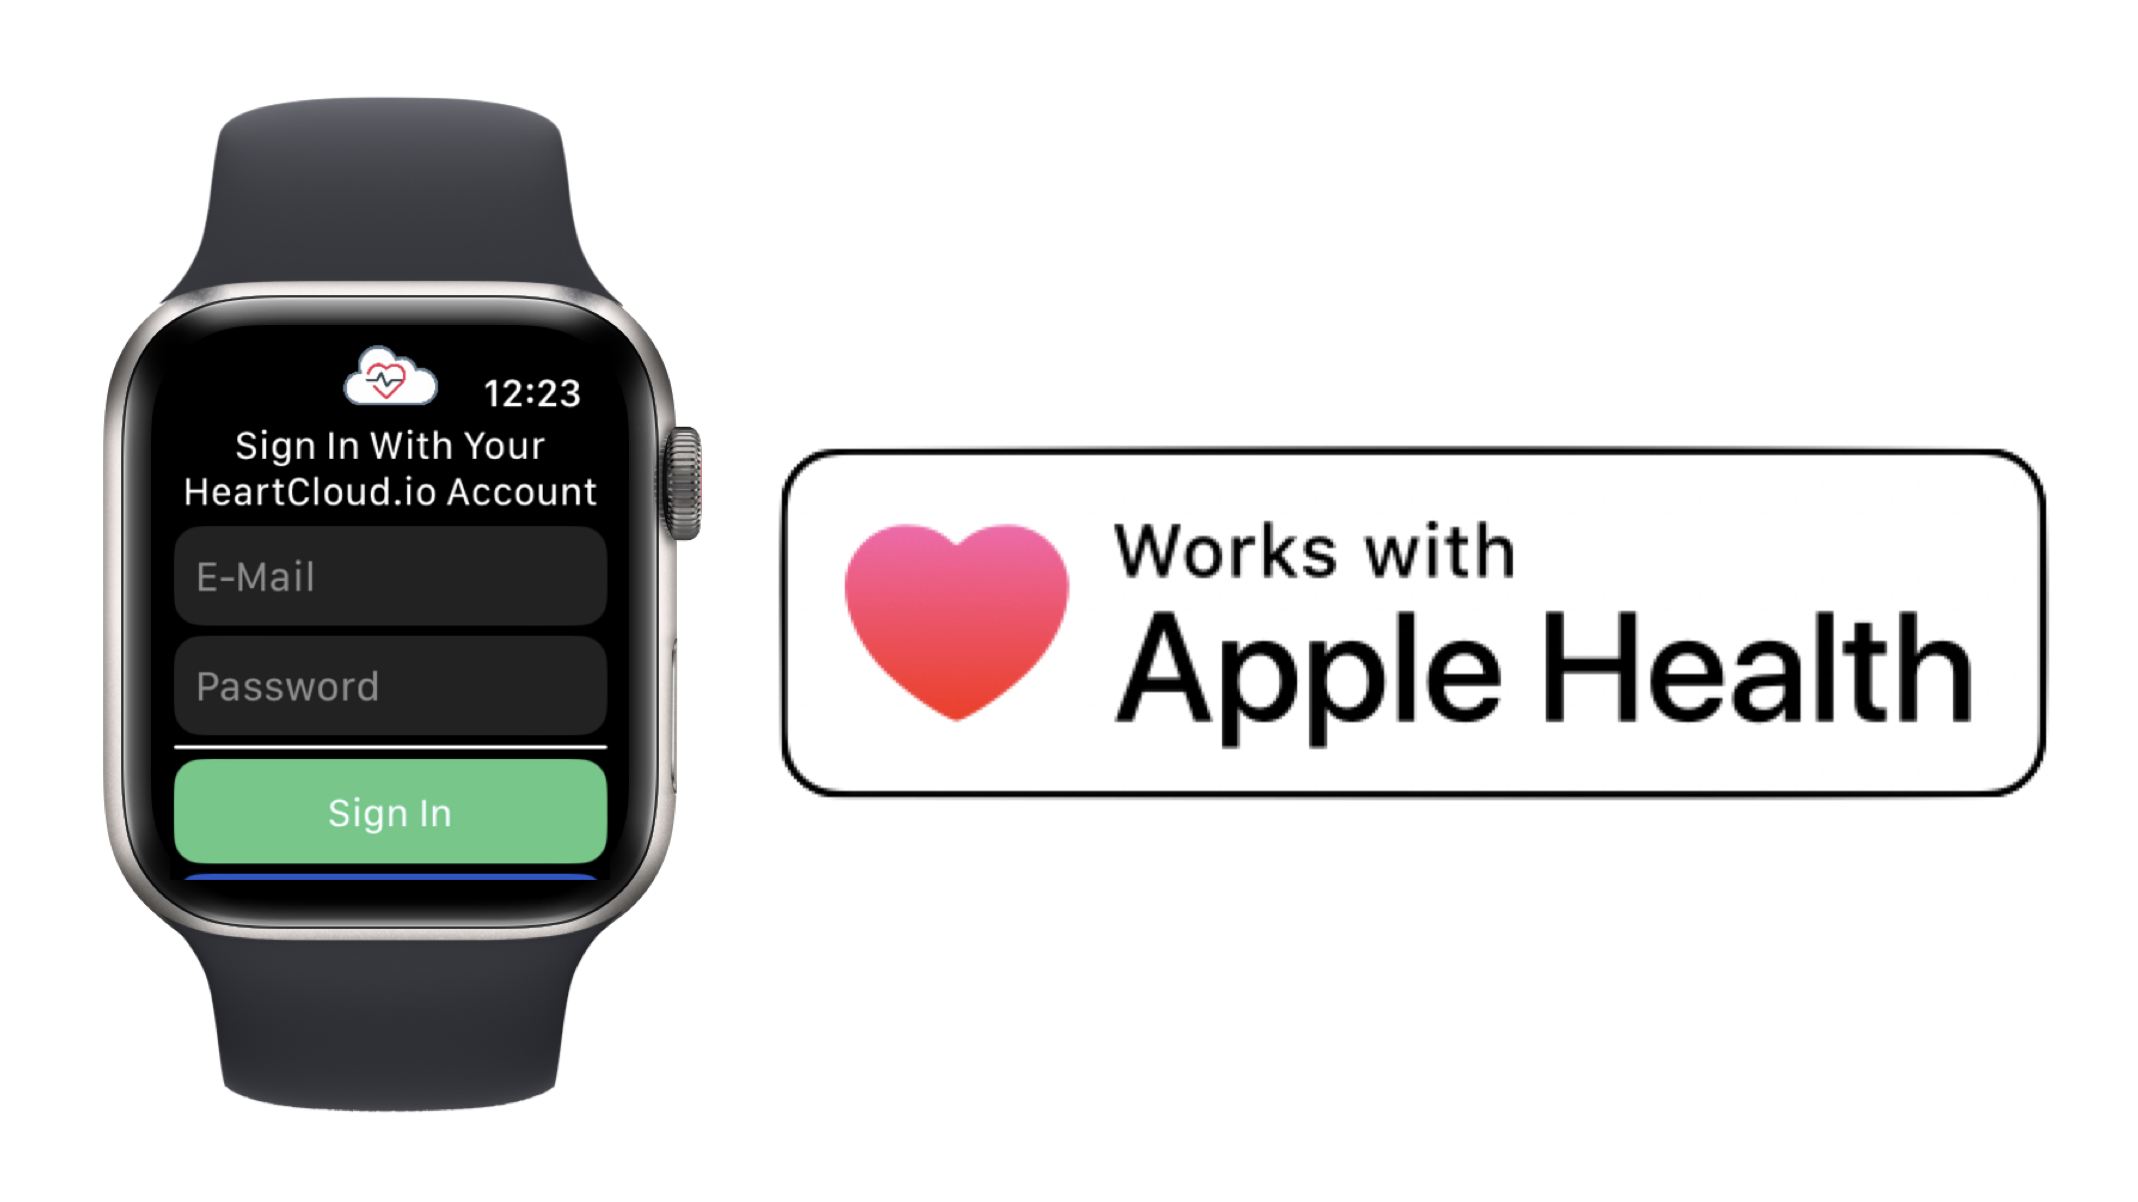 "Works With Apple Health" official banner to the right of an Apple Watch with the HeartCloud Sync for Apple Watch app login view (vertically: the HeartCloud logo, e-mail and password input fields, green "Sign In" button)